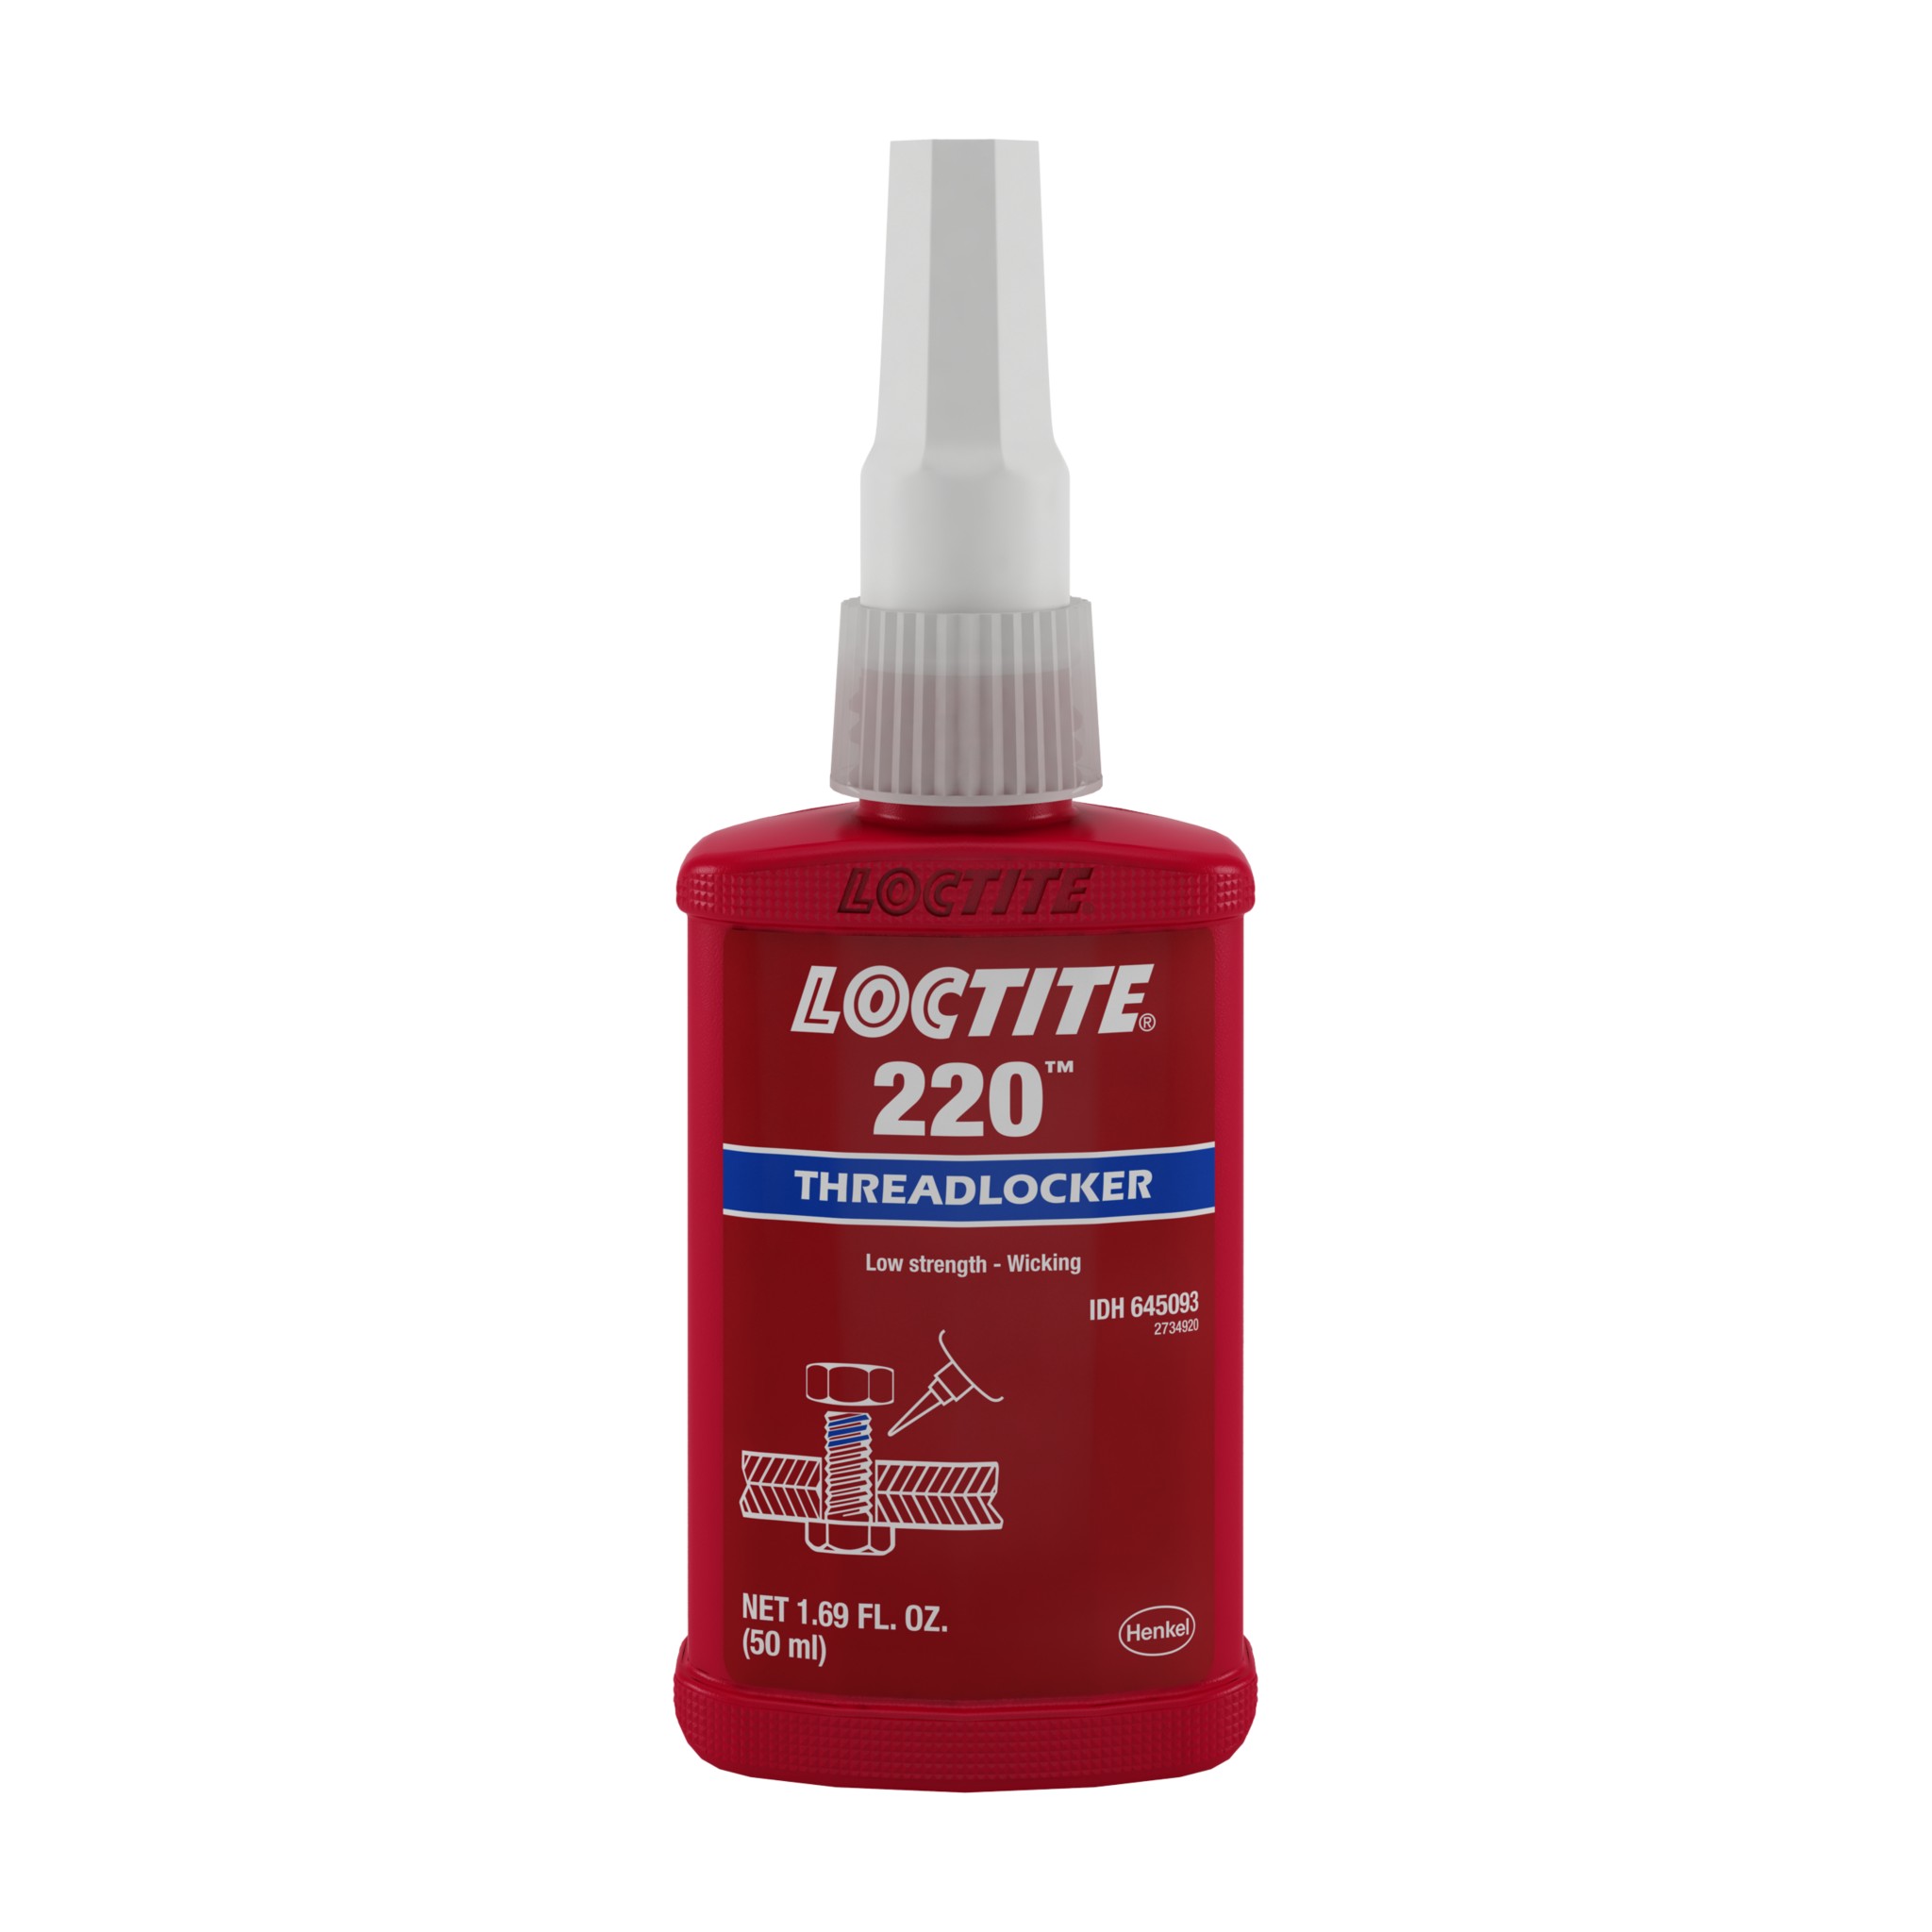 In the Lab with LOCTITE® - Proper Use of Threadlocker 